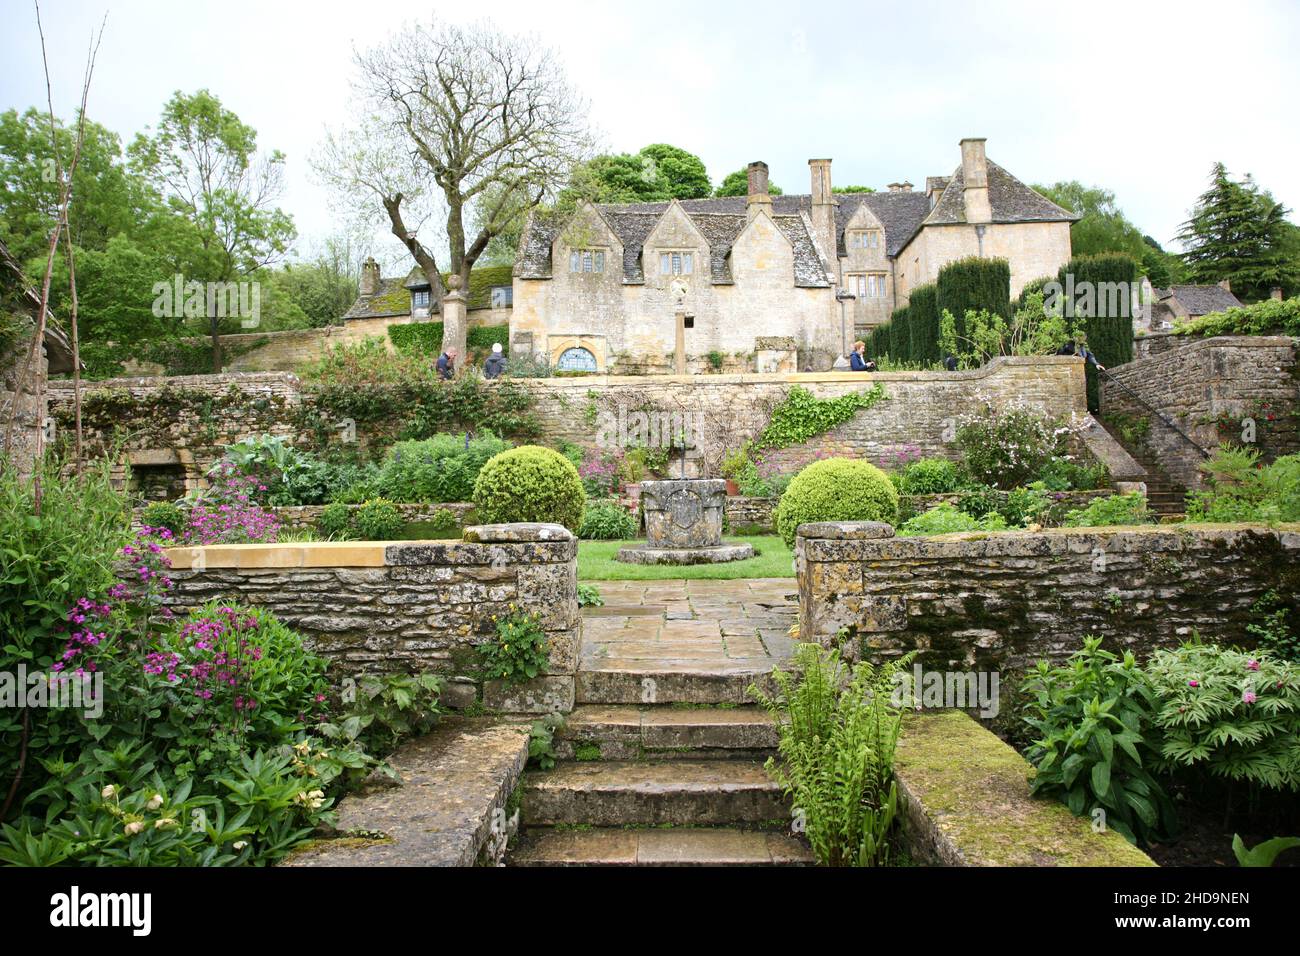 Snowshill Manor House and Garden Foto Stock